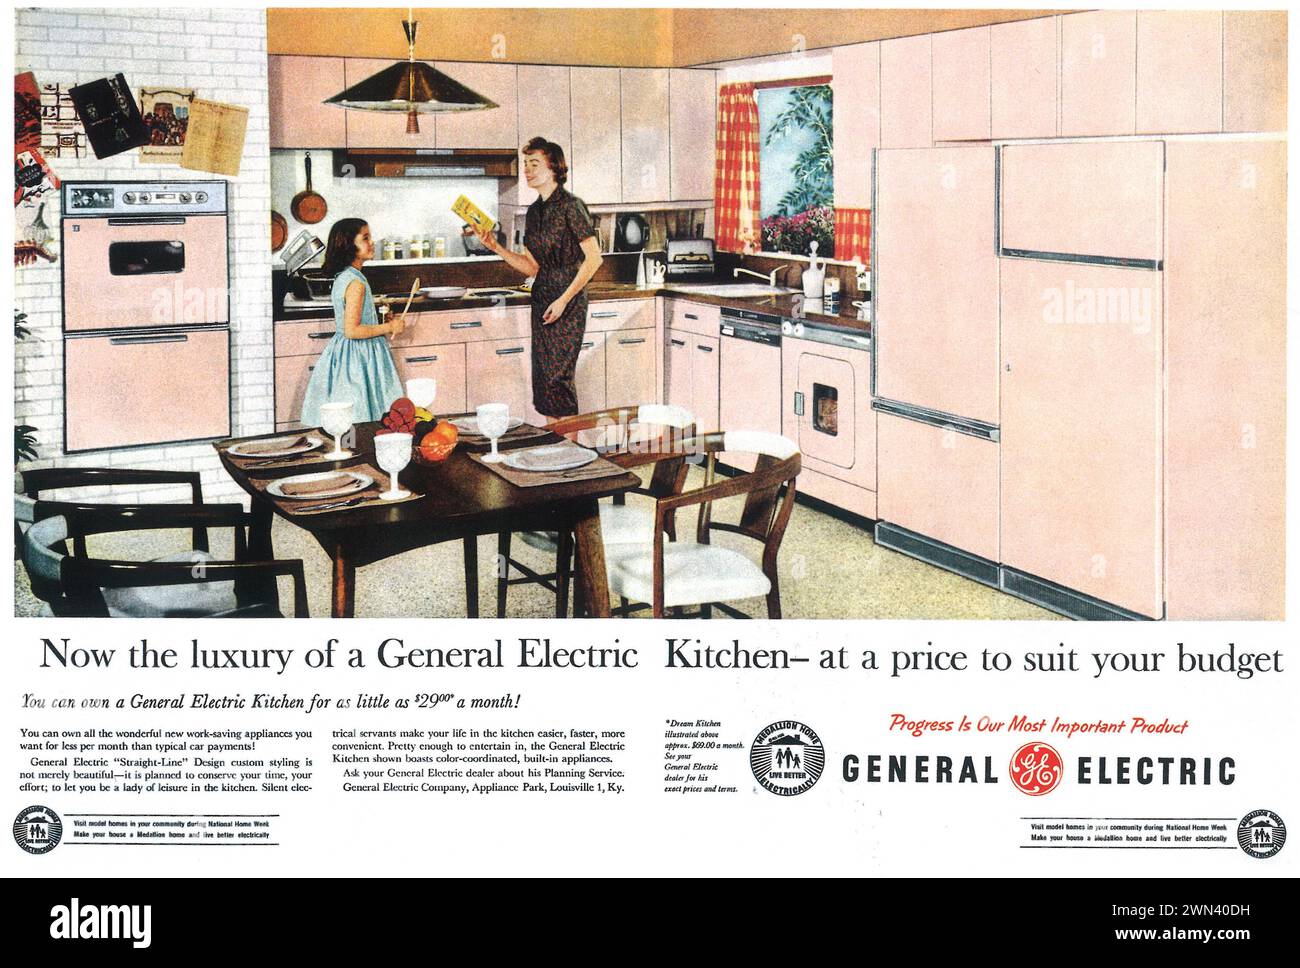 1959 General Electric Kitchen Print Ad Stock Photo